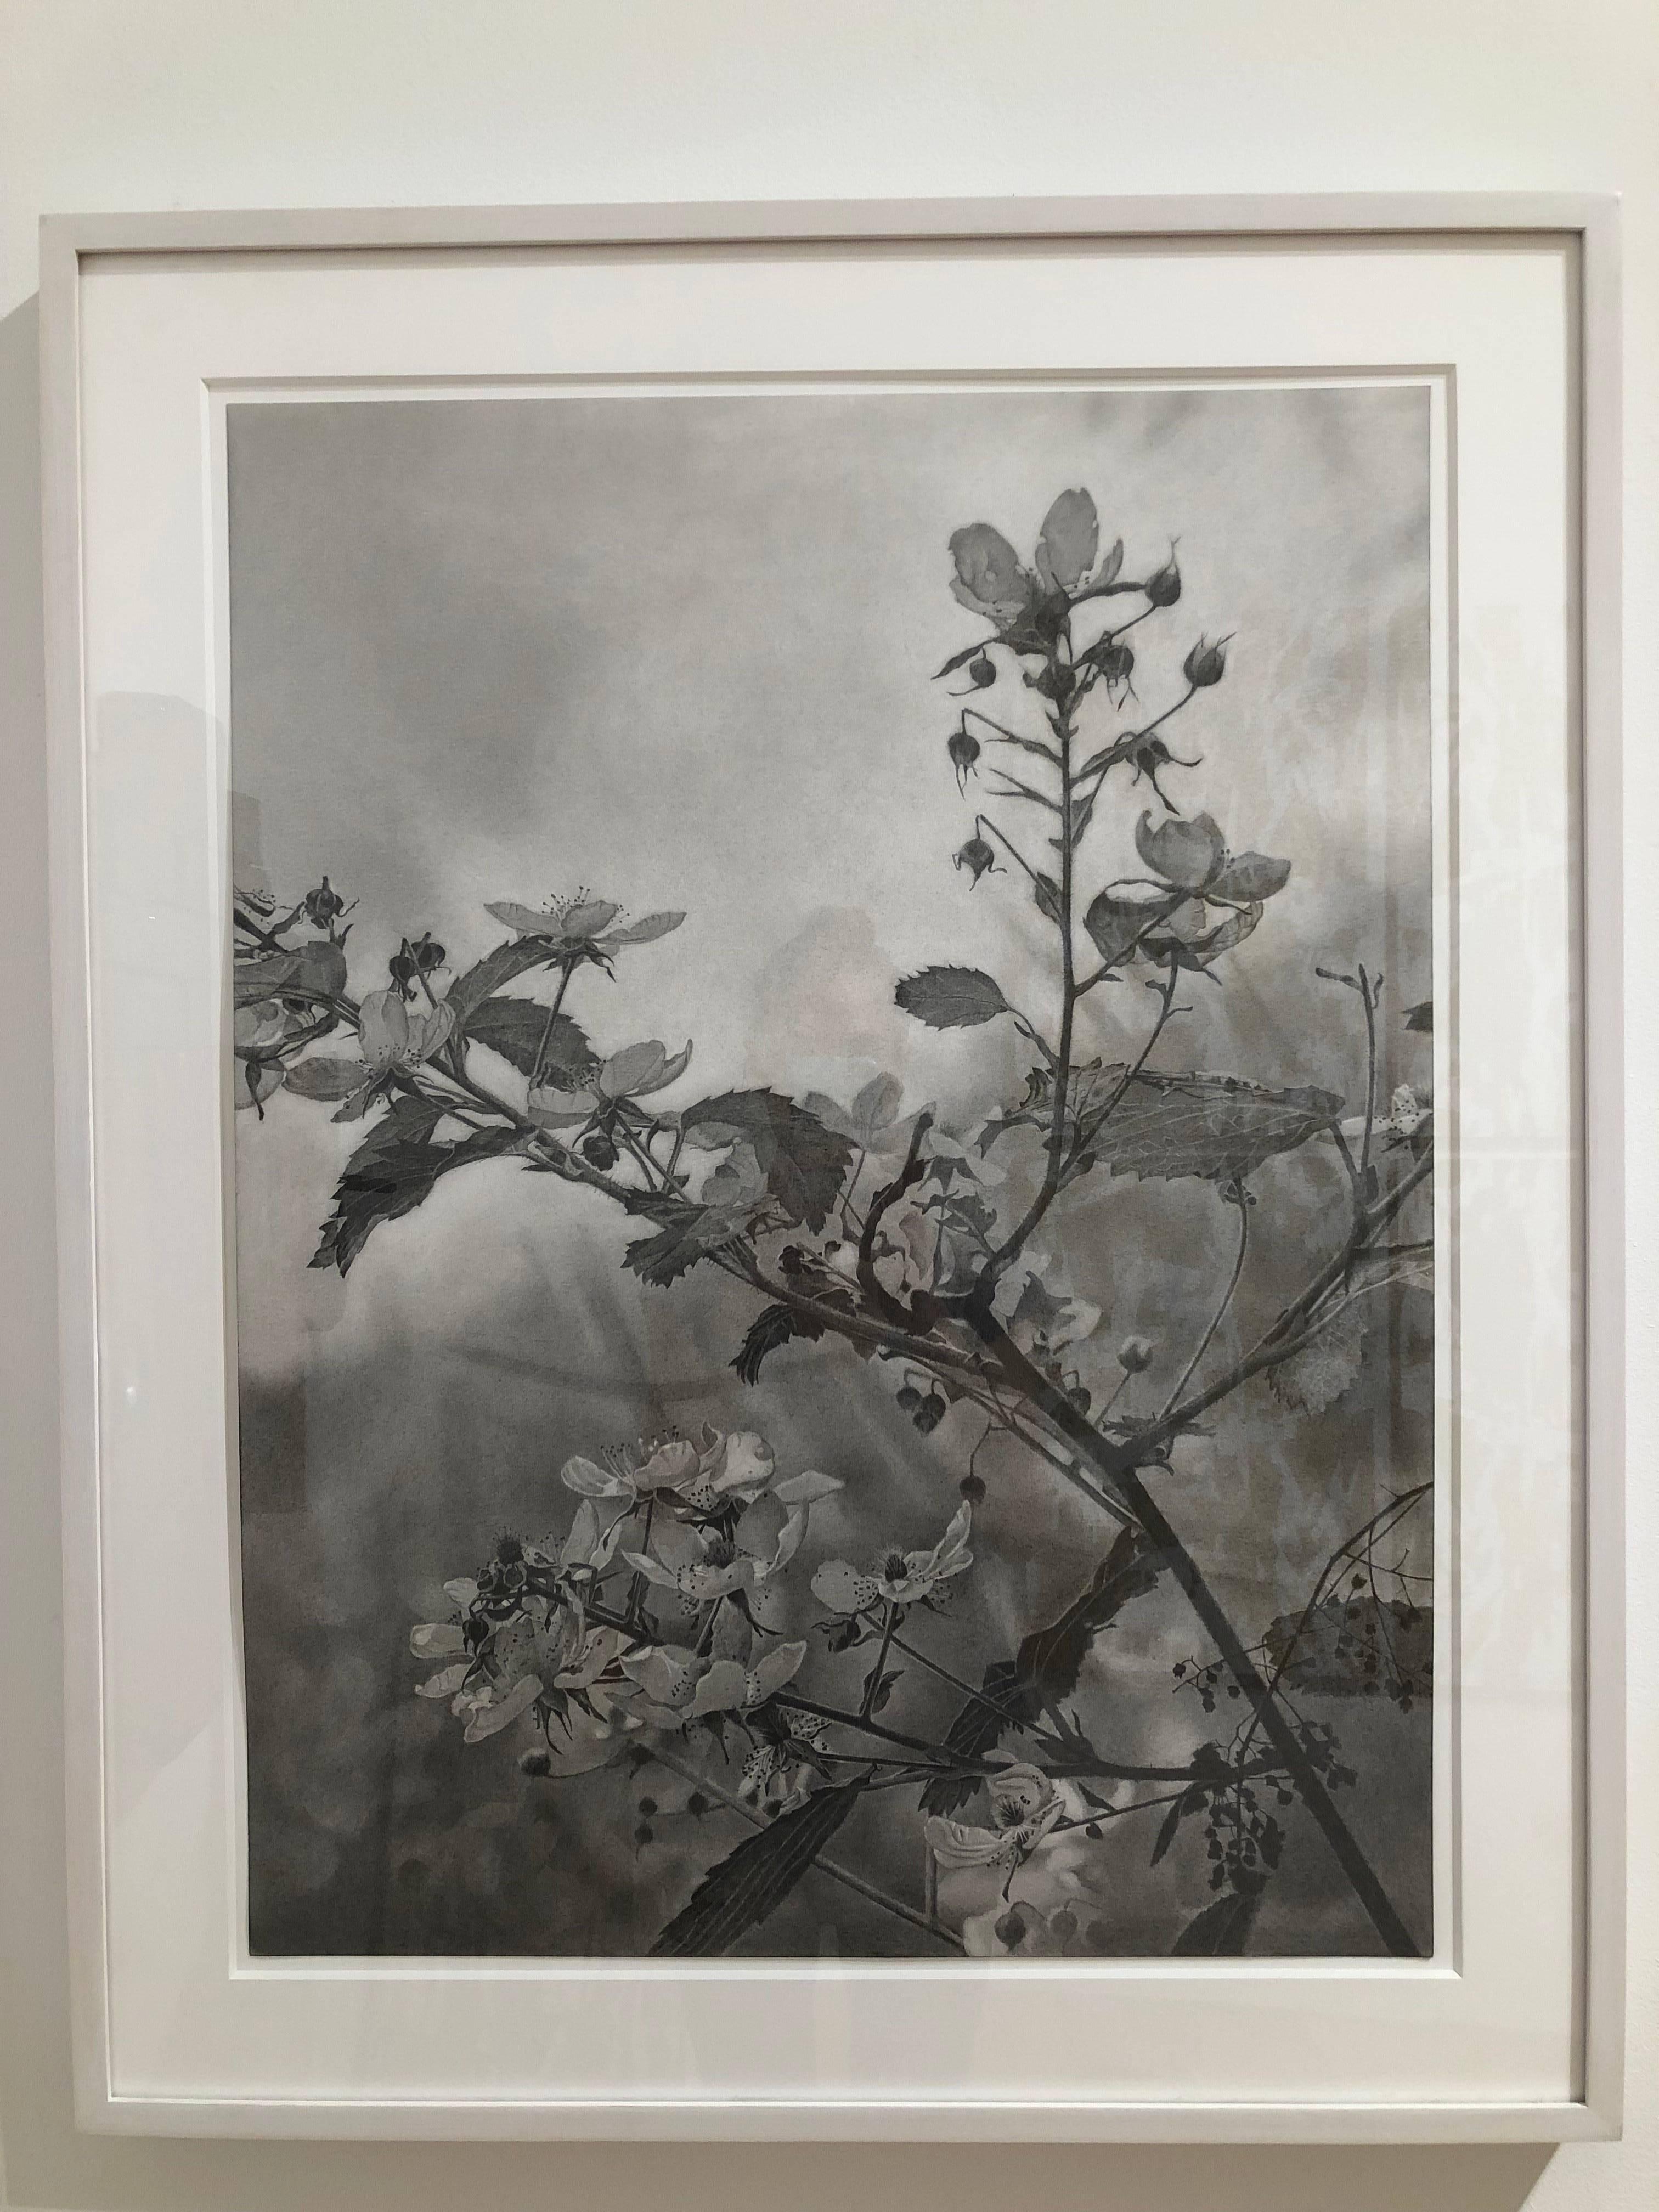 Flowering Hillside, grayscale photorealist graphite landscape drawing, 2018 - Art by Mary Reilly